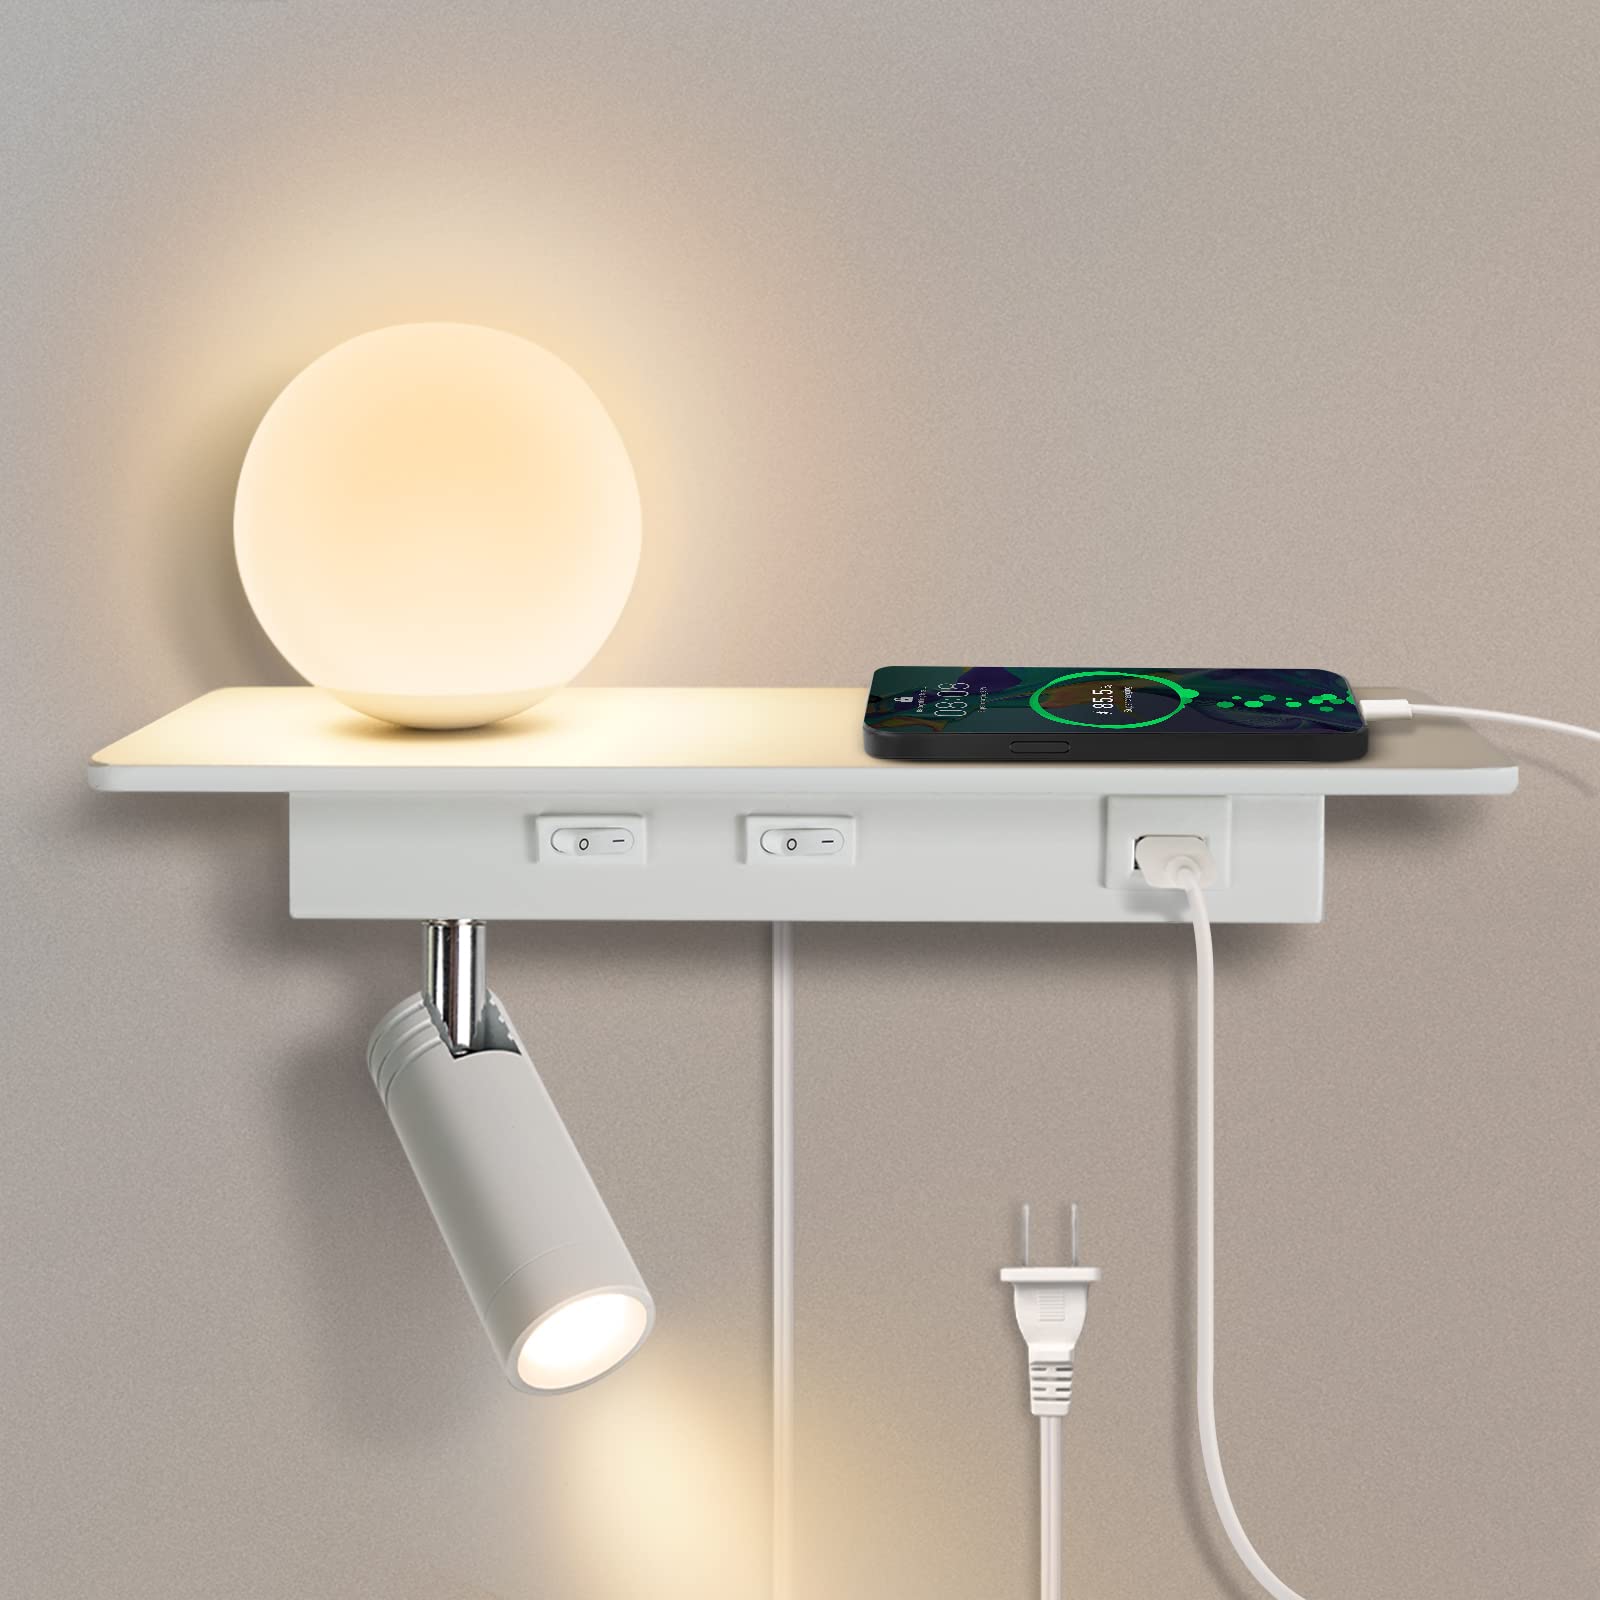 M02 Wall Mounted Reading Lamp with Romantic Ball Light USB Charging